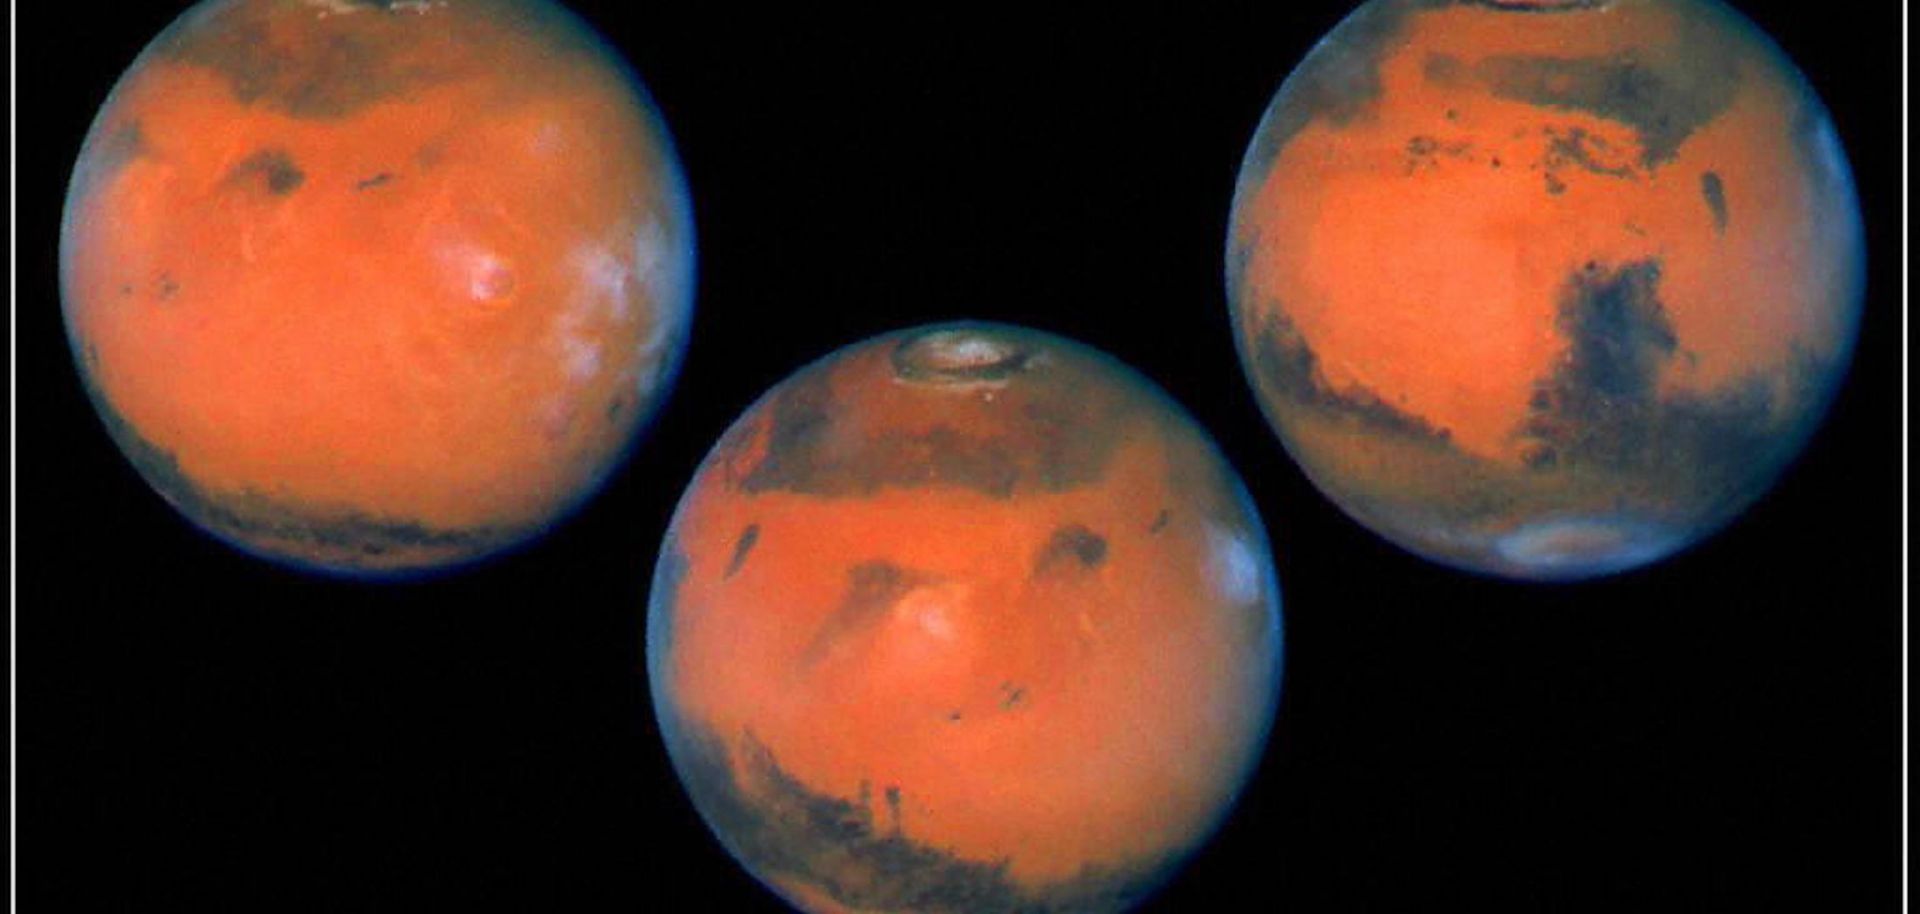 A NASA photo shows a full rotation of the planet Mars as seen through the recently upgraded Hubble Telescope using the wide-field planetary camera. The photos were taken six hours apart, which allows for almost full planetary coverage.